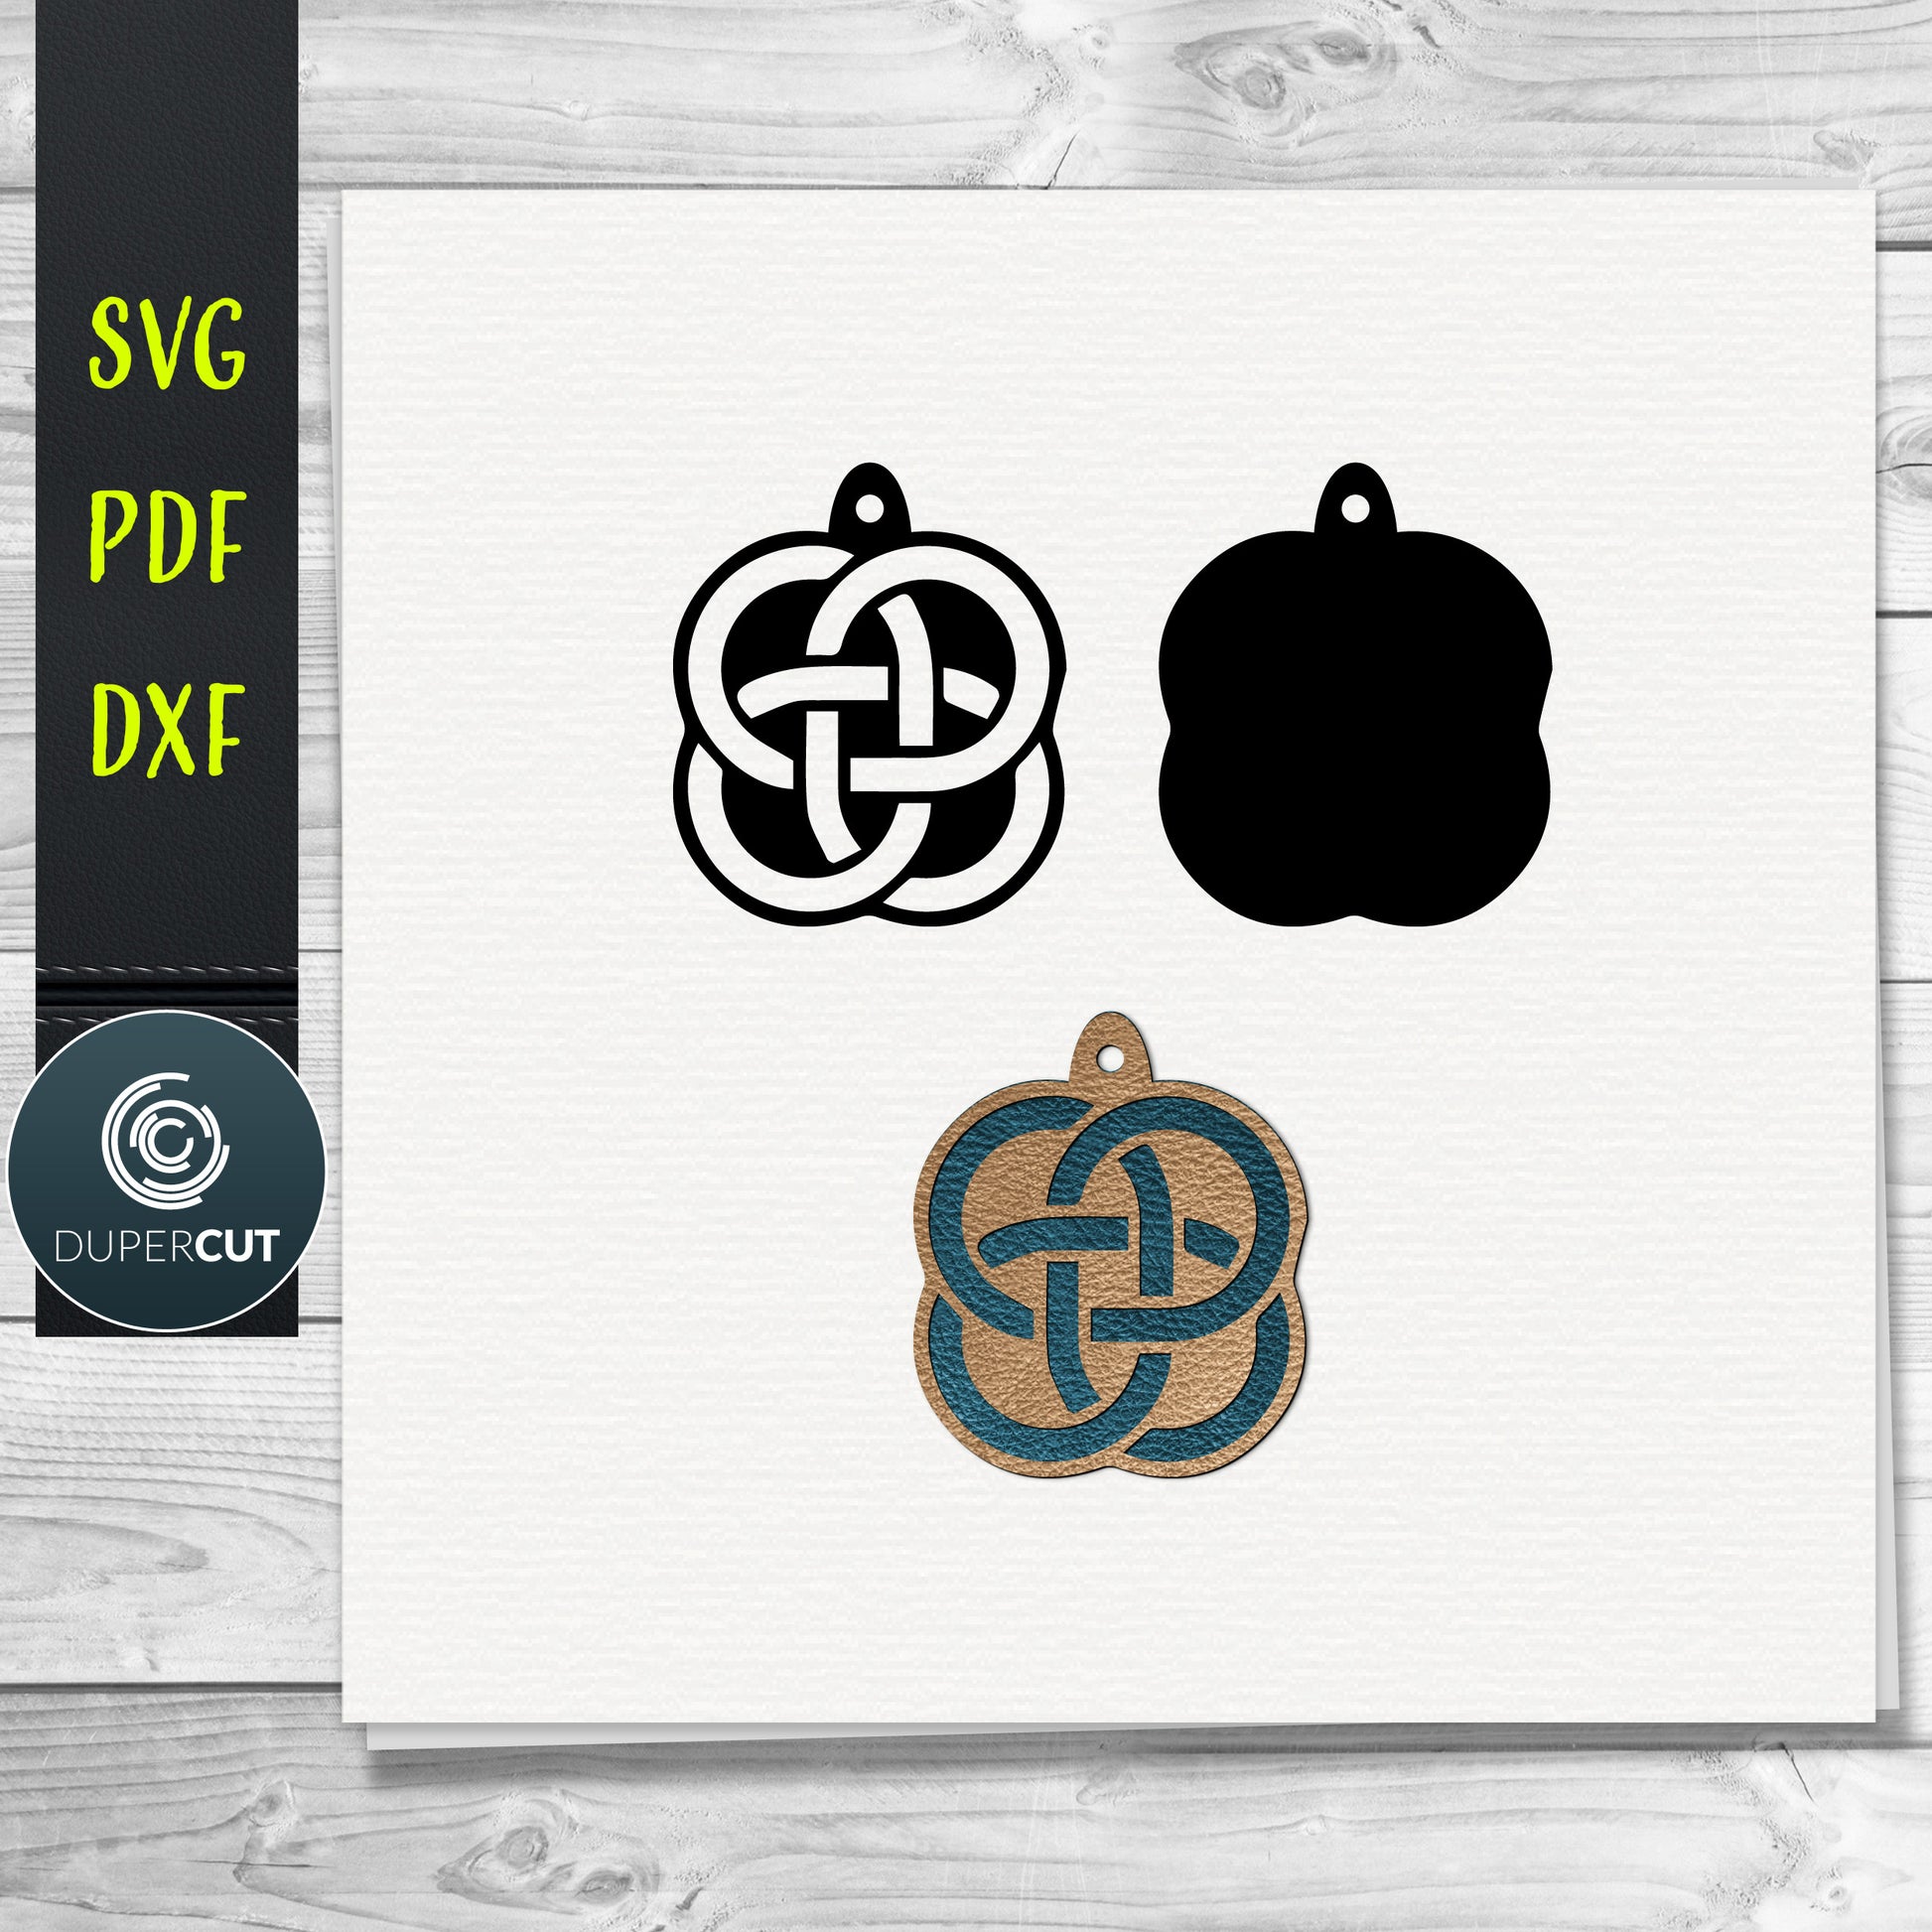 DIY celtic knot Layered Leather Earrings SVG PDF DXF vector files. Jewellery making template for laser and cutting machines - Glowforge, Cricut, Silhouette Cameo.